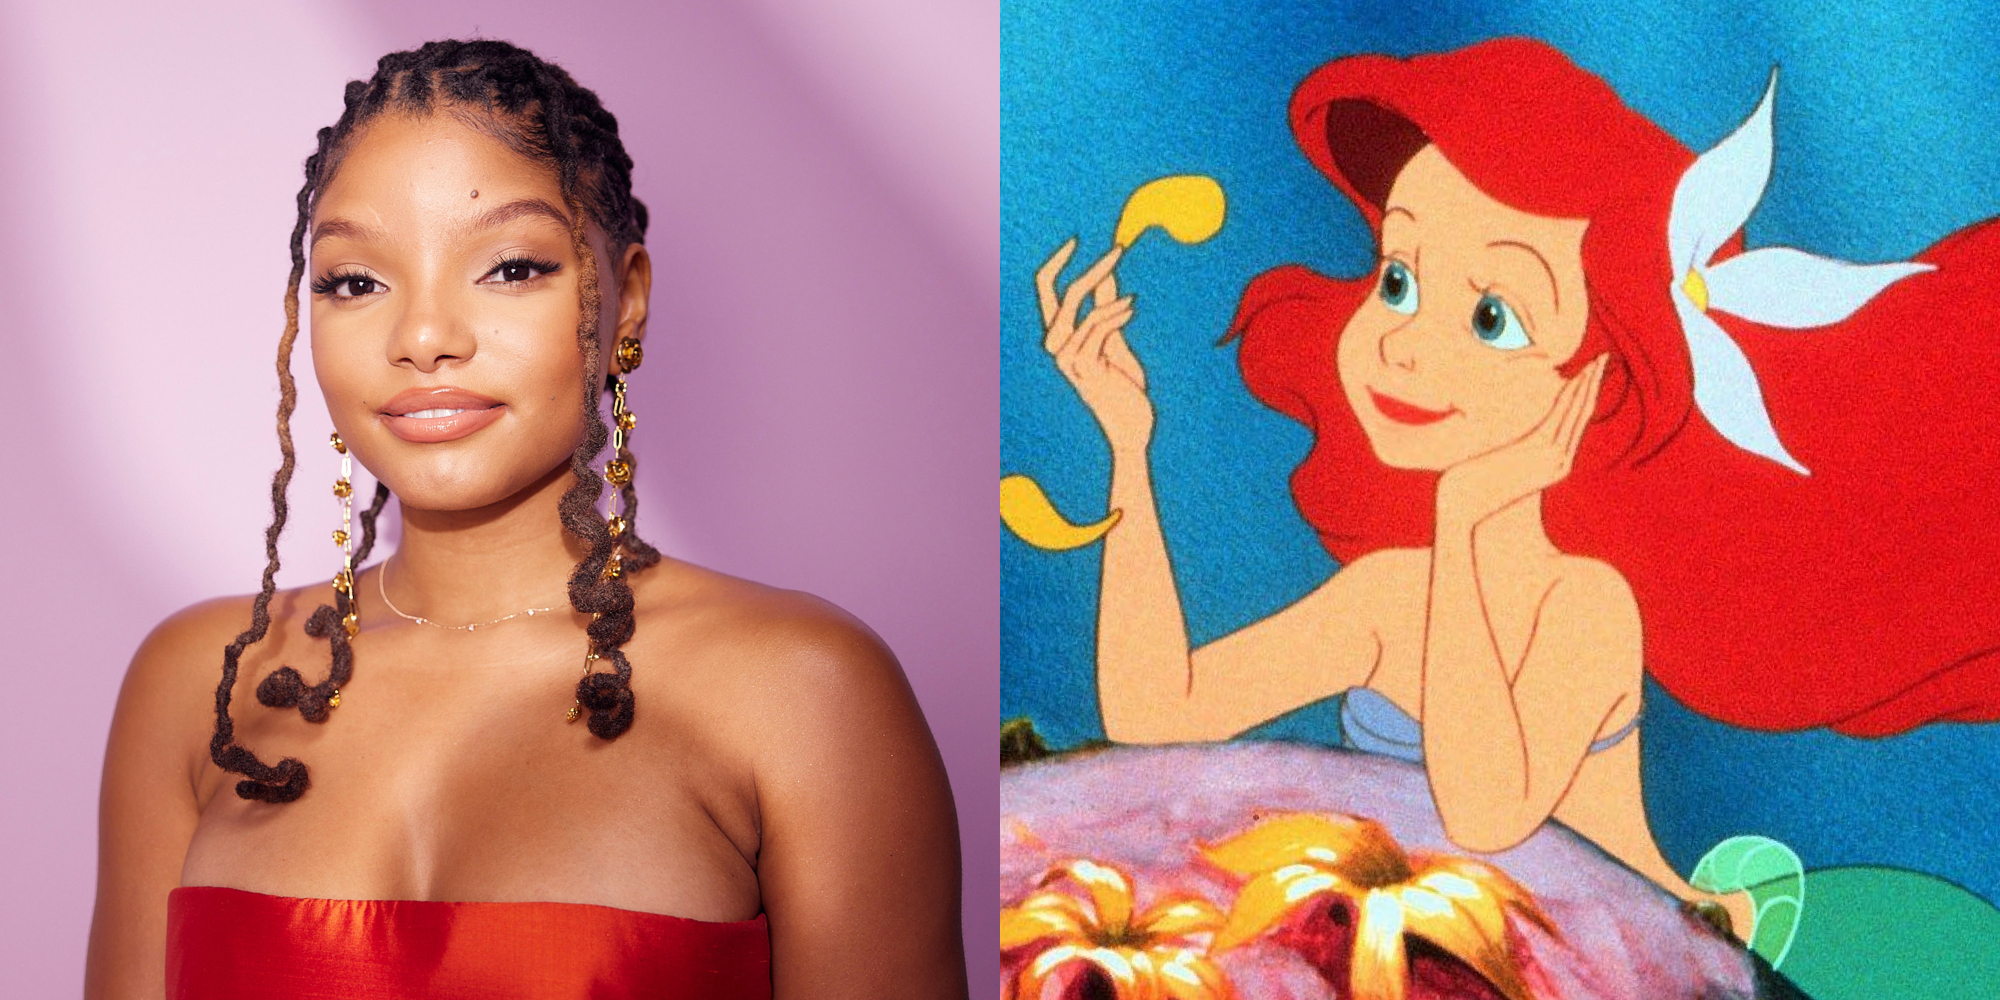 Ariel from All-New “The Little Mermaid” Live-Action Film Coming to